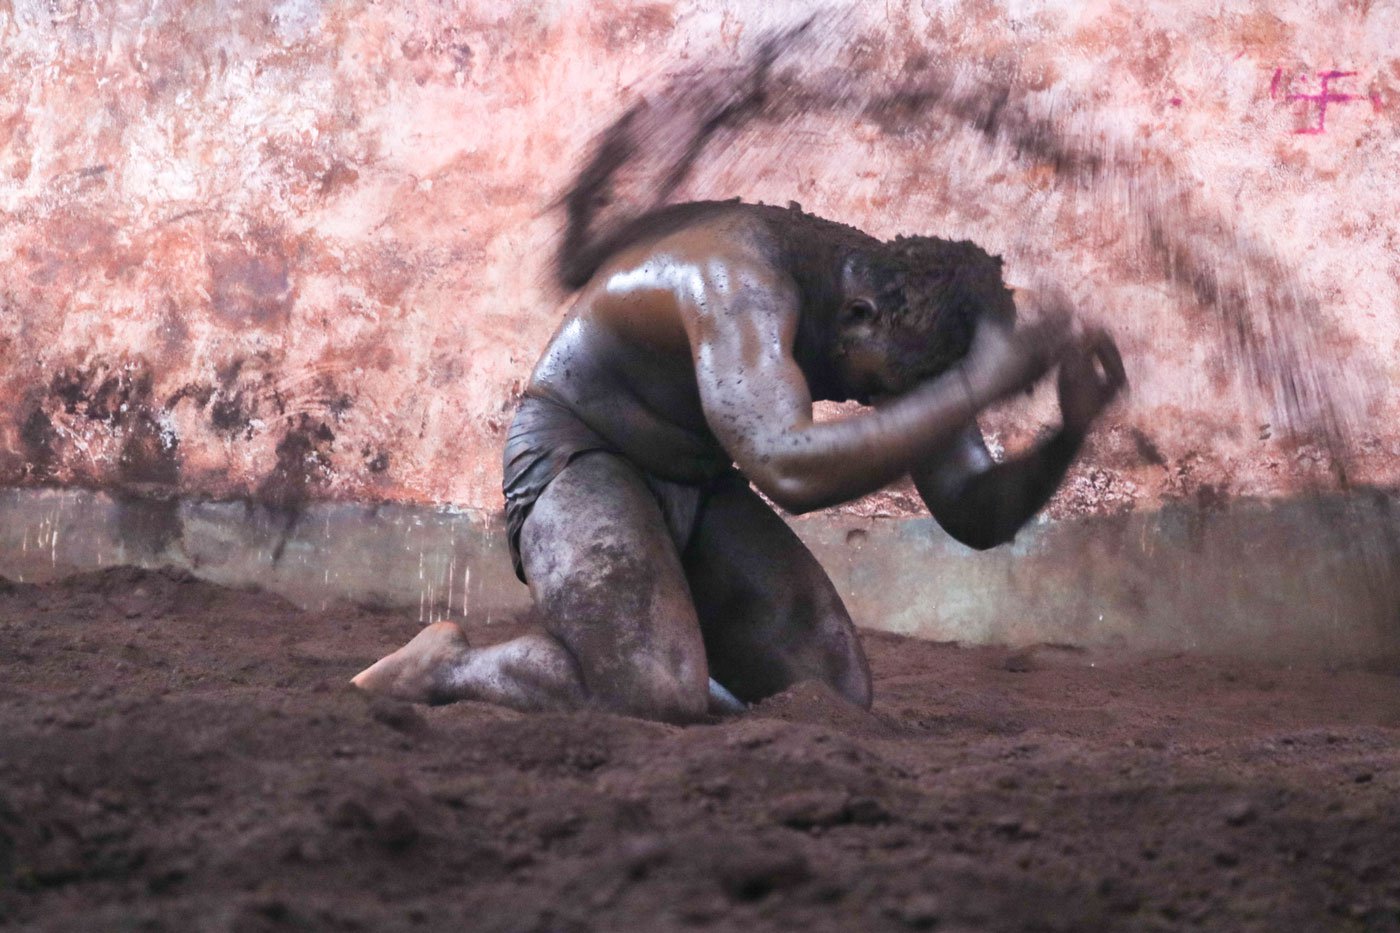 Though Juney Pargaon village's taleem is shut since March 2020, a few wrestlers continue to sometimes train inside. They first cover themselves with red soil to maintain a firm grip during the bouts